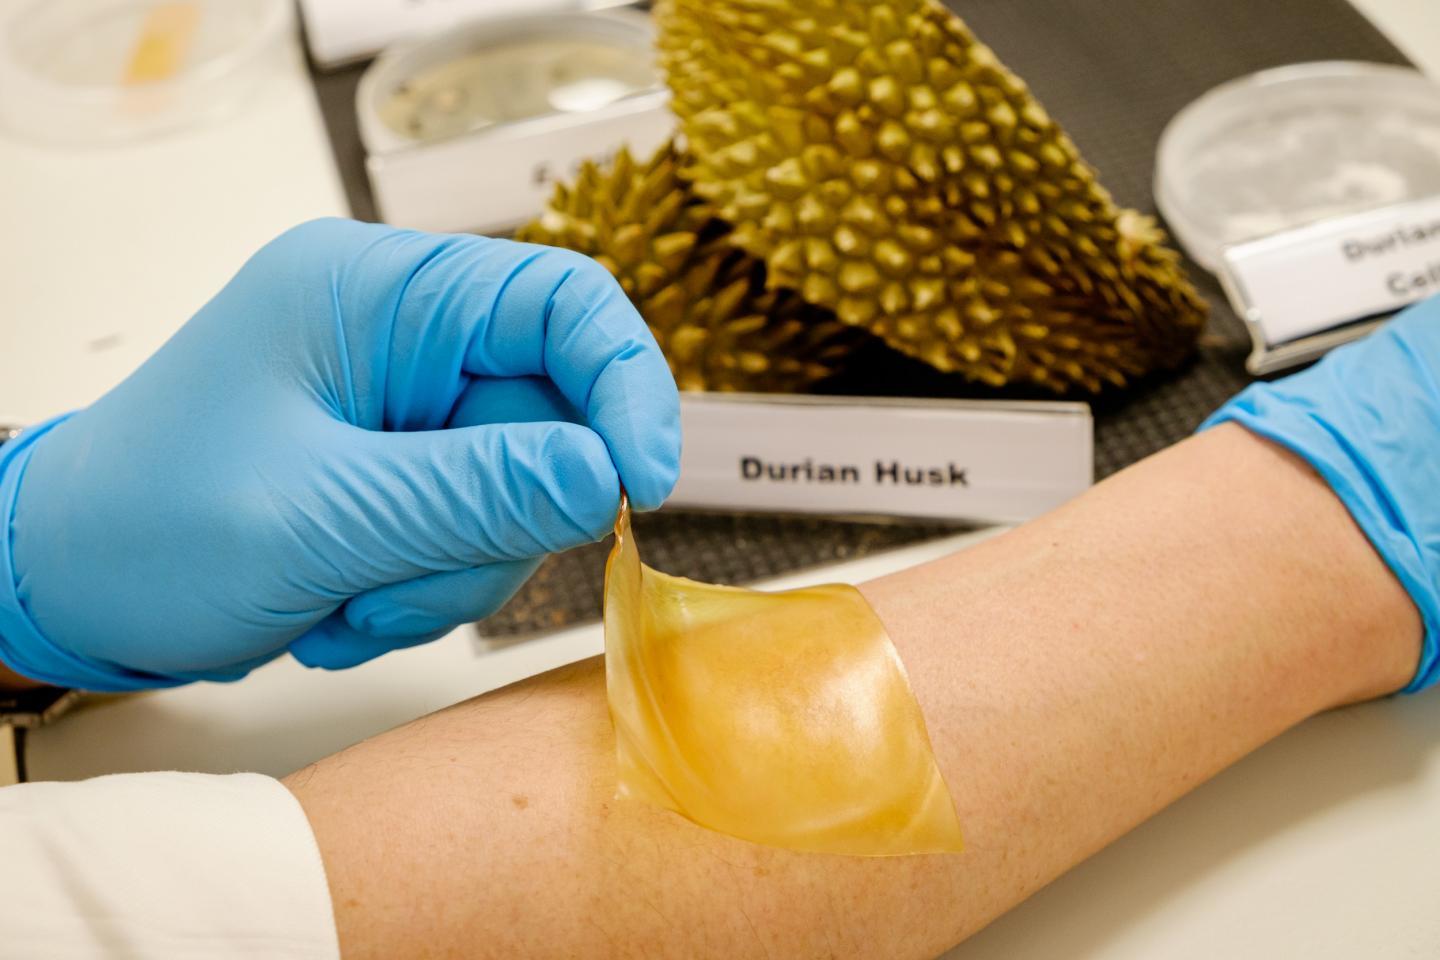 Like other hydrogel dressings, this one is applied directly to the skin